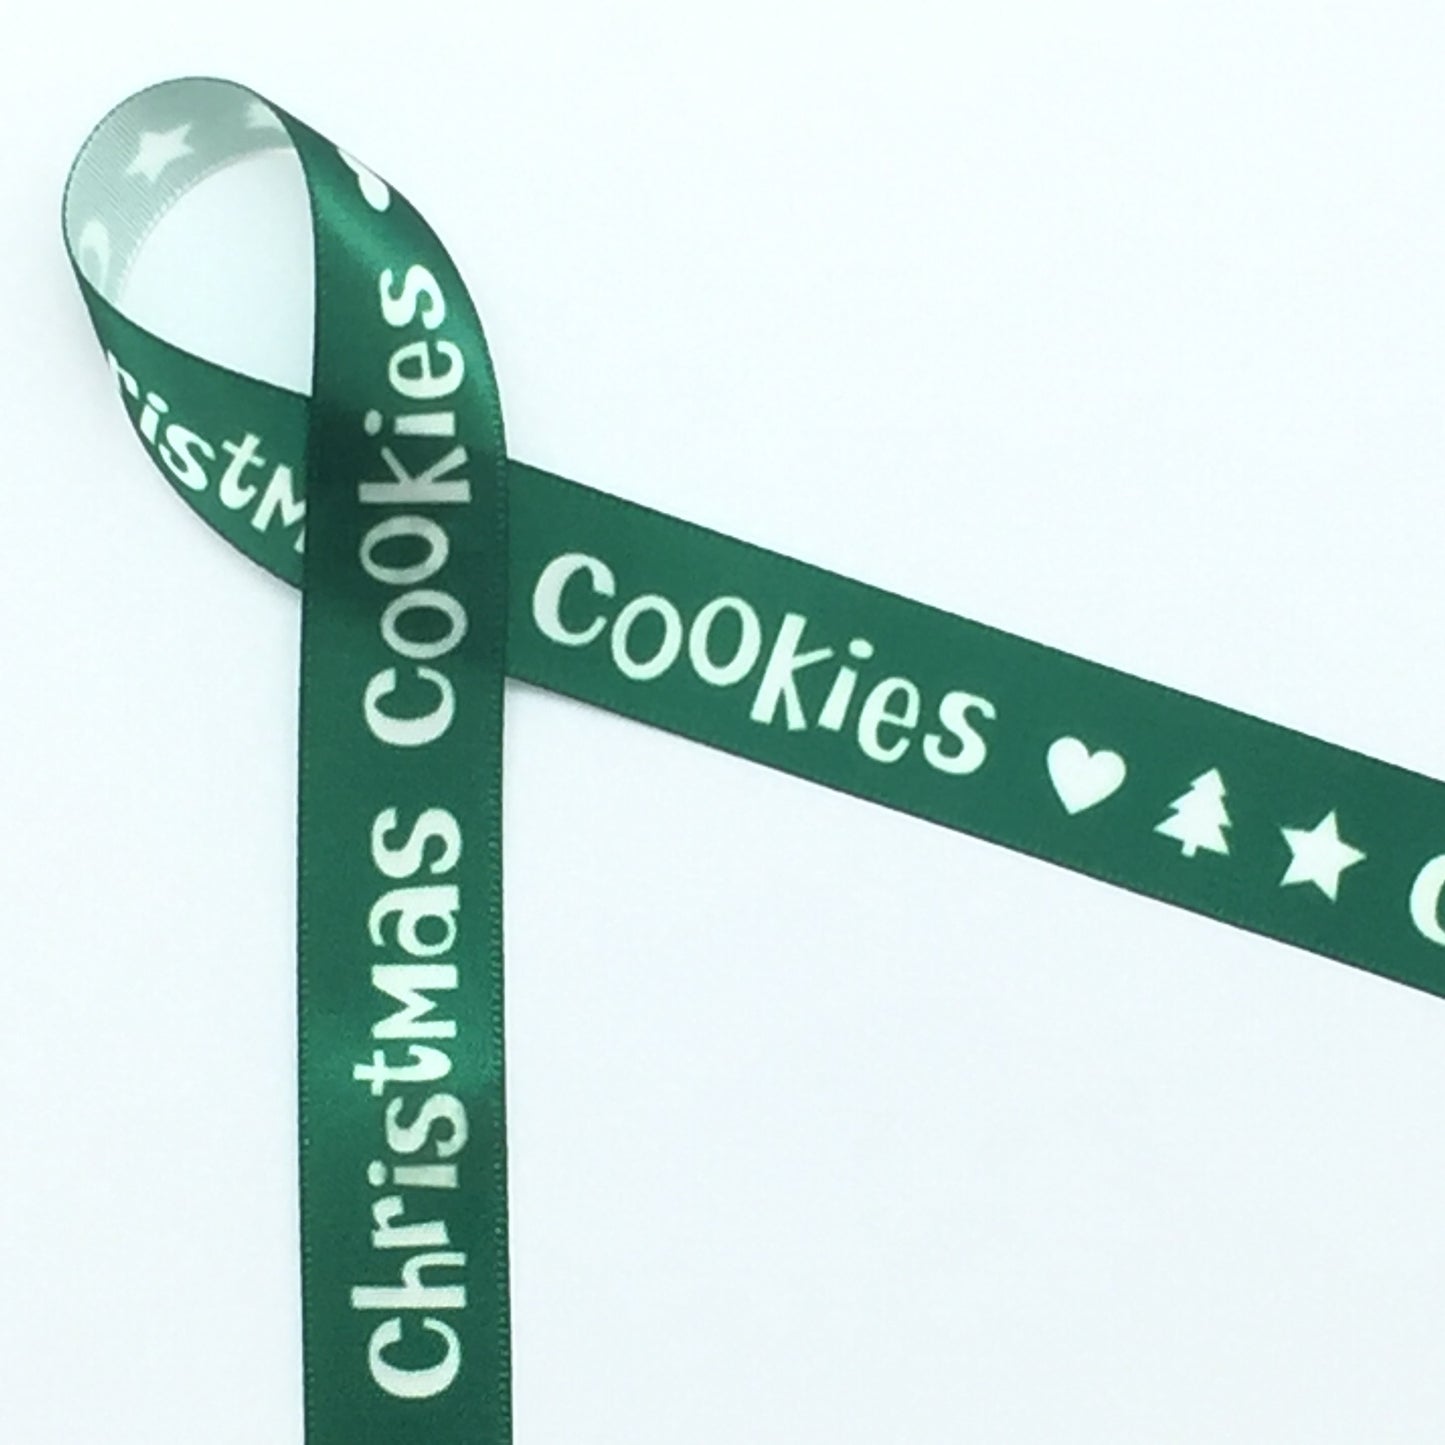 Christmas Cookies Ribbon in white with a Red or Green background on White 5/8" single face Satin